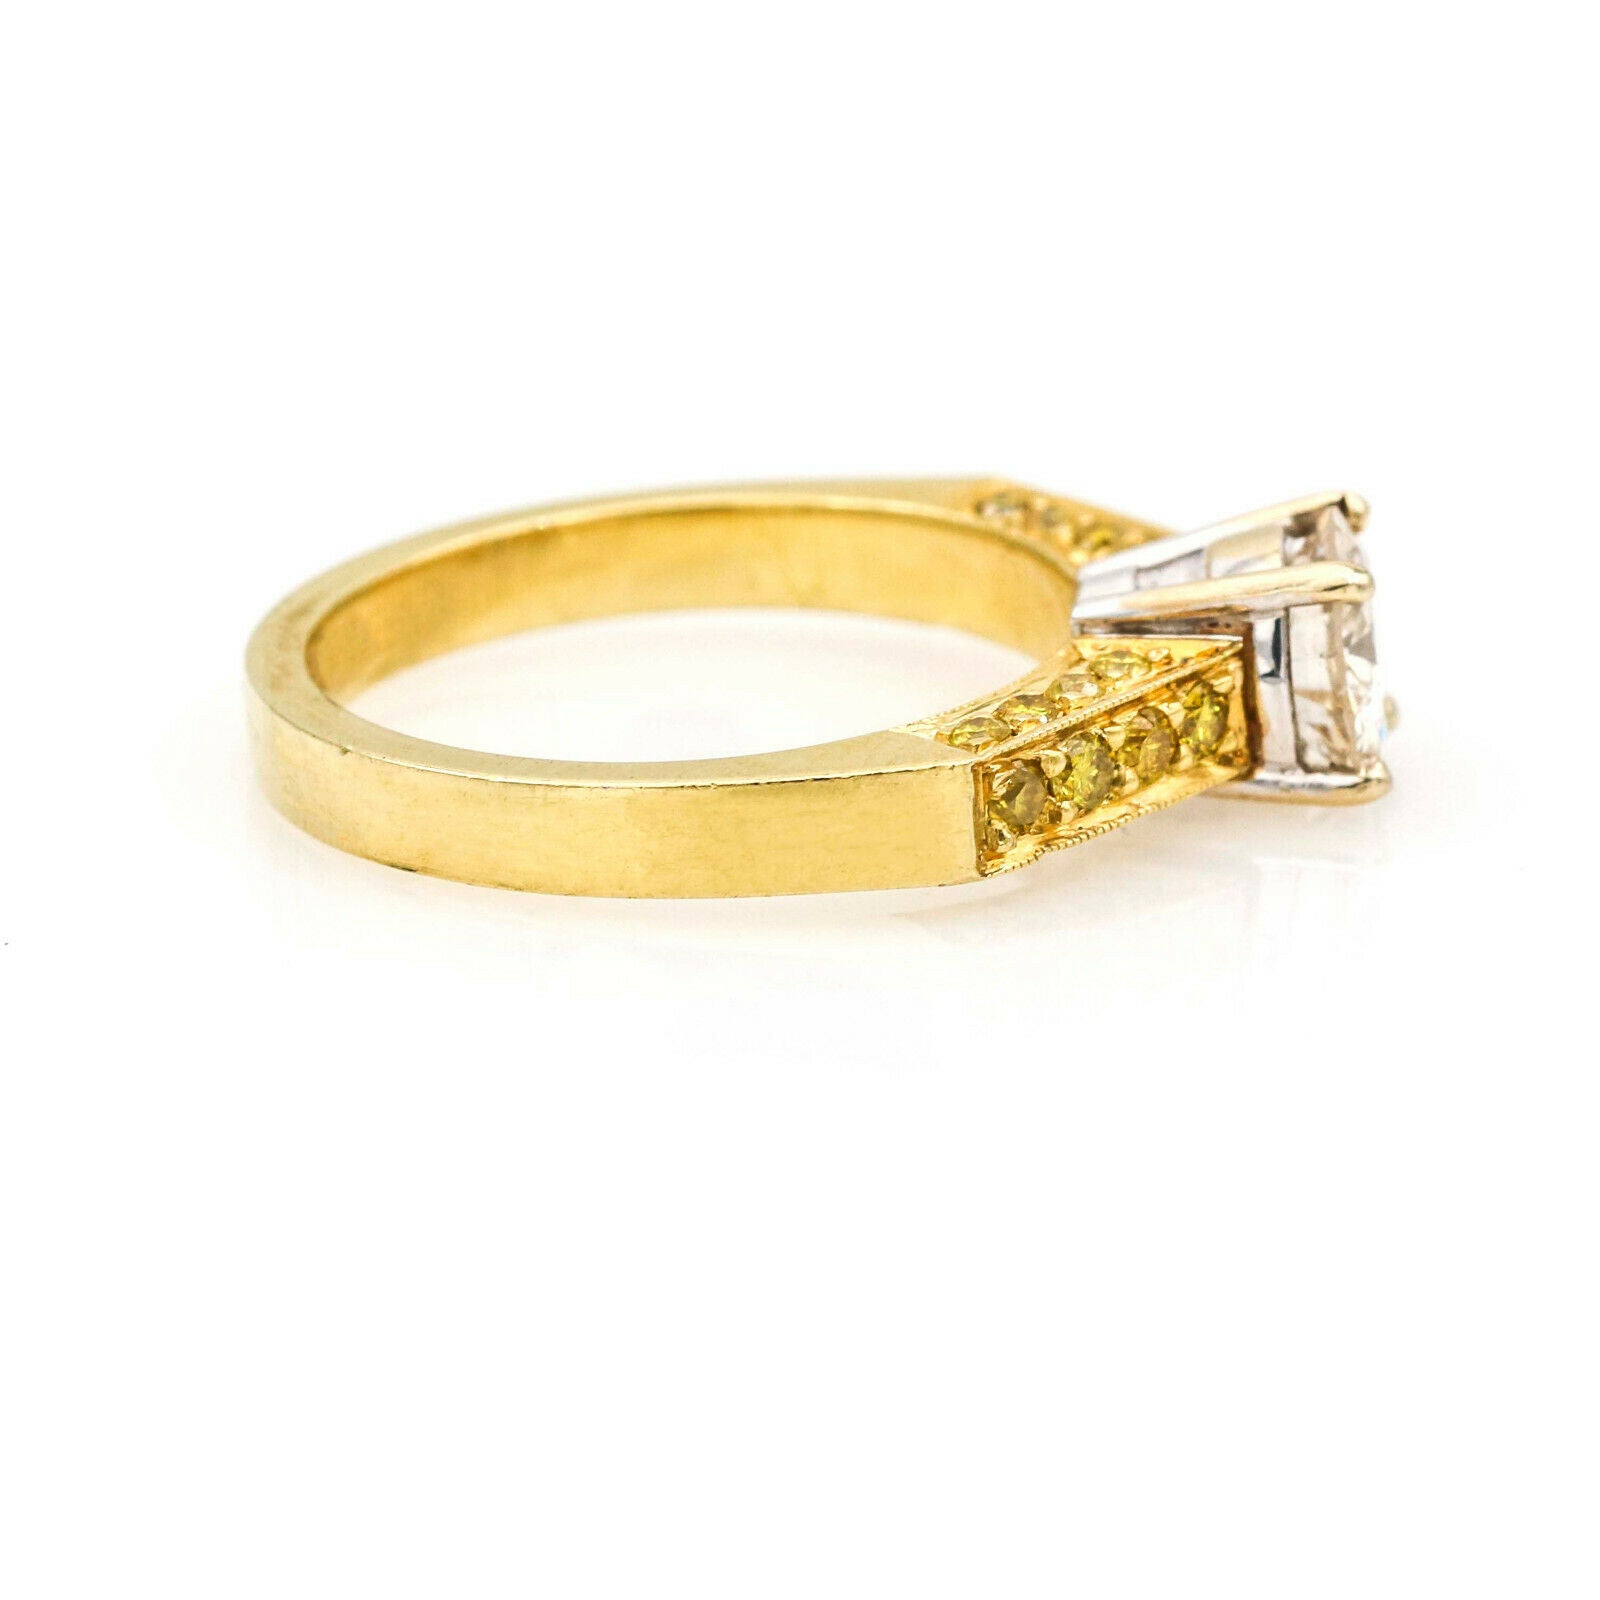 Solitaire Diamond Engagement Ring with Fancy Yellow Accents in 18k Gold